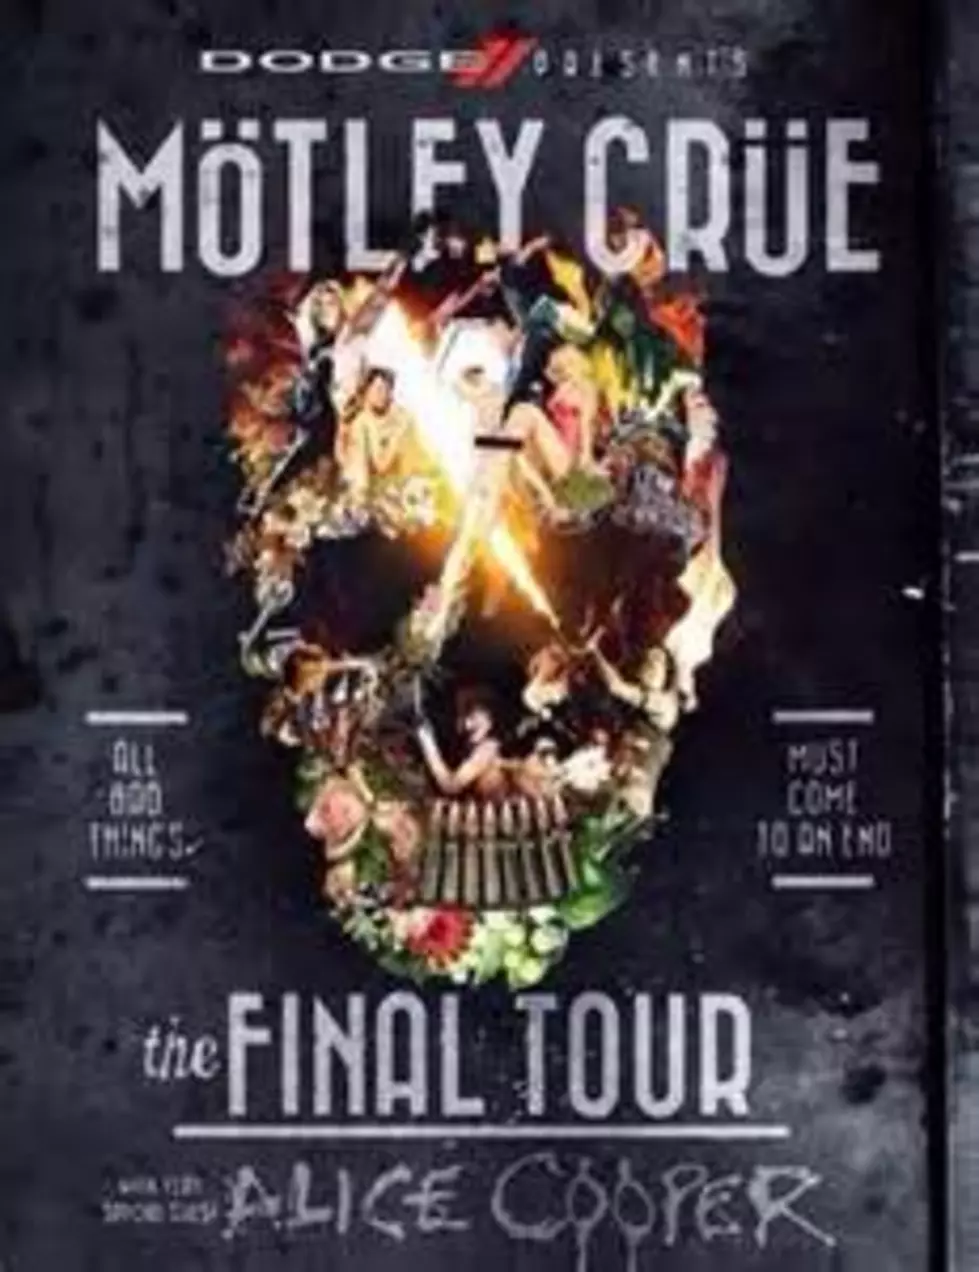 WPDH Welcomes Motley Crue All Bad Things Must Come To An End: The Final Tour with Special Guest Alice Cooper to SPAC!